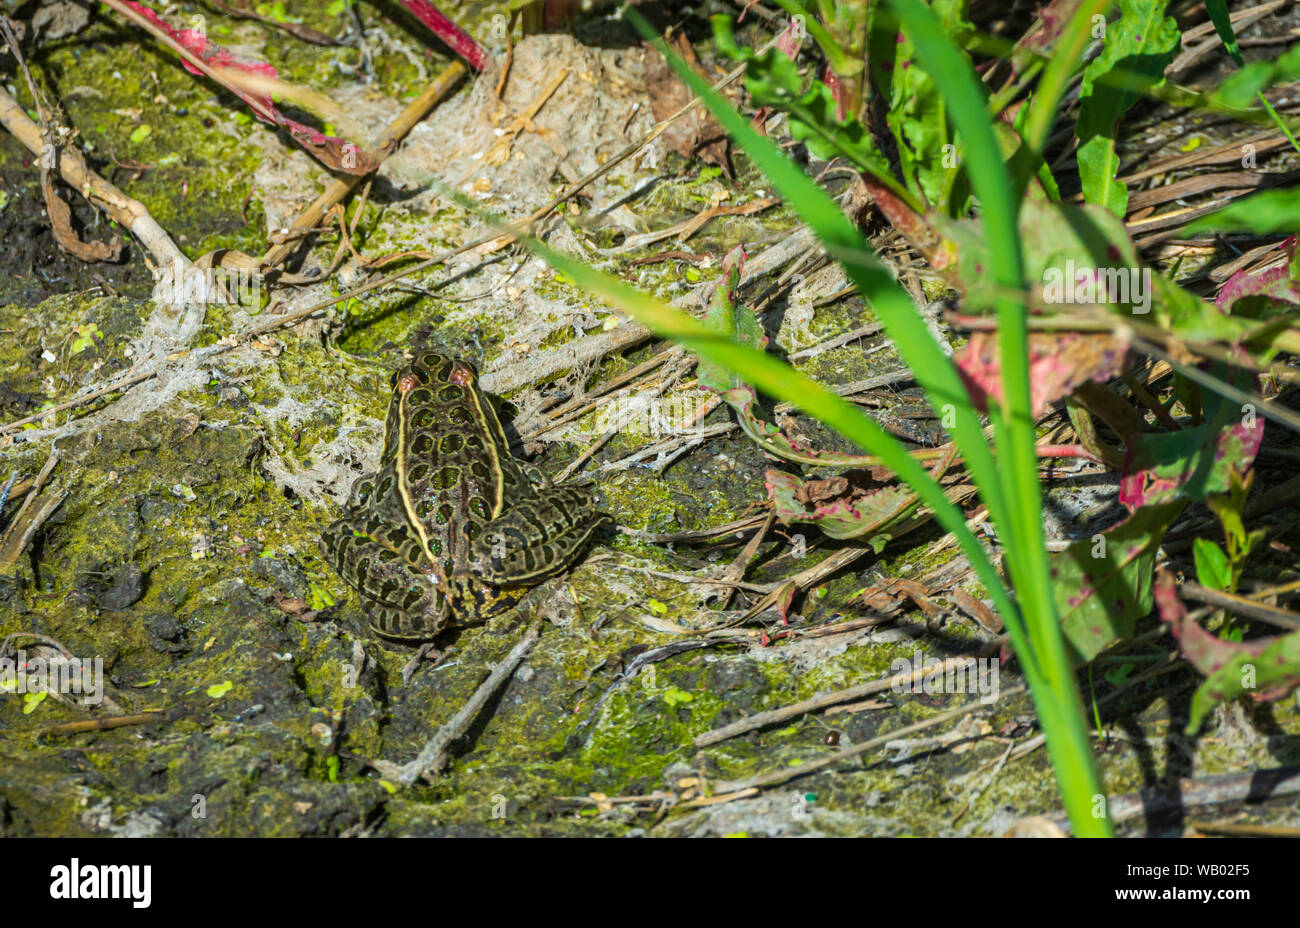 Adult Northern Leopard frog (Lithobates pipiens) sits in cattail marsh among duckweed, Castle Rock Colorado US. Photo taken in August. Stock Photo